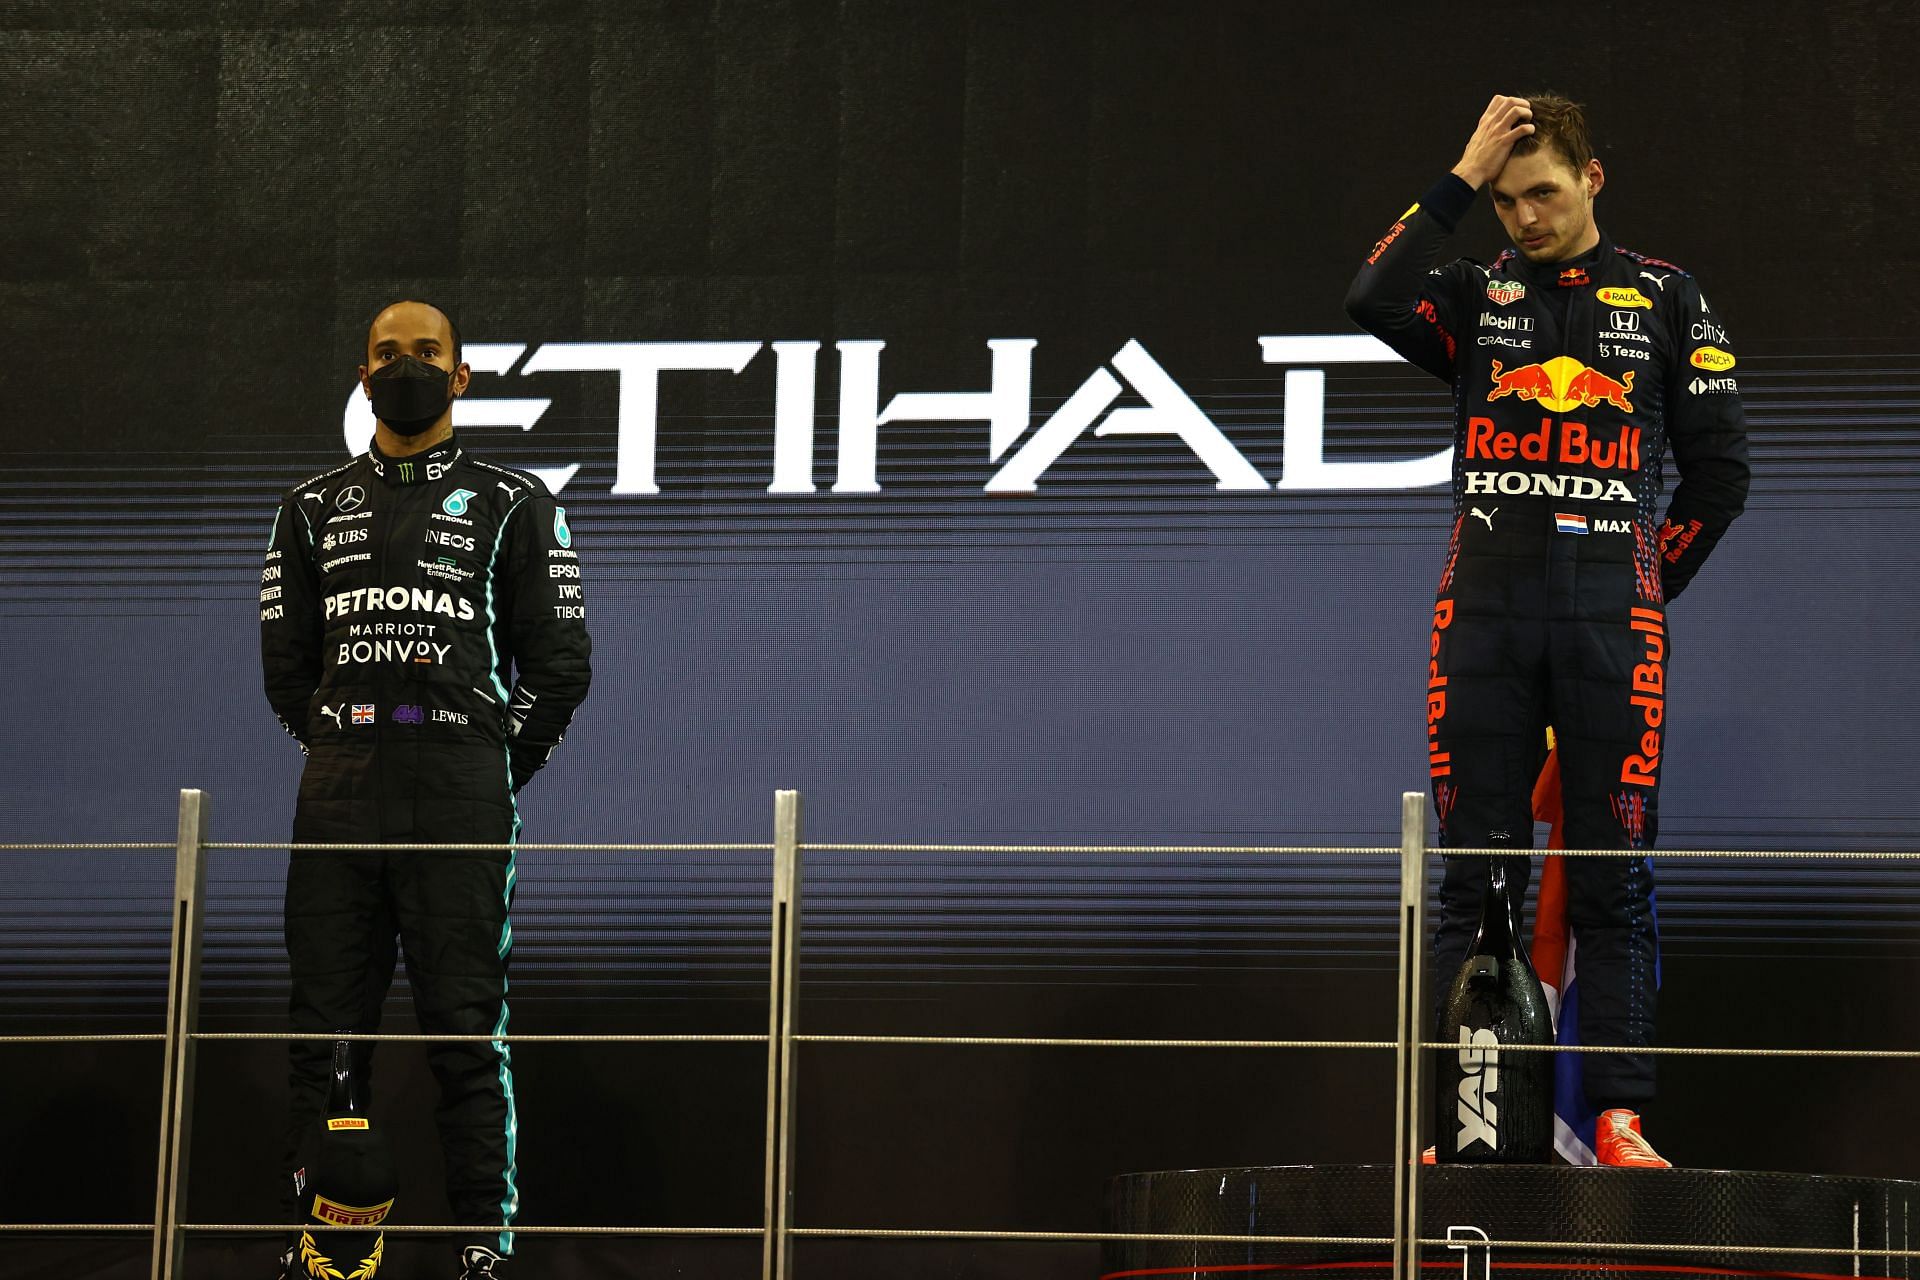 Lewis Hamilton (left) and Max Verstappen (right) at the Abu Dhabi Grand Prix podium (Photo by Bryn Lennon/Getty Images)